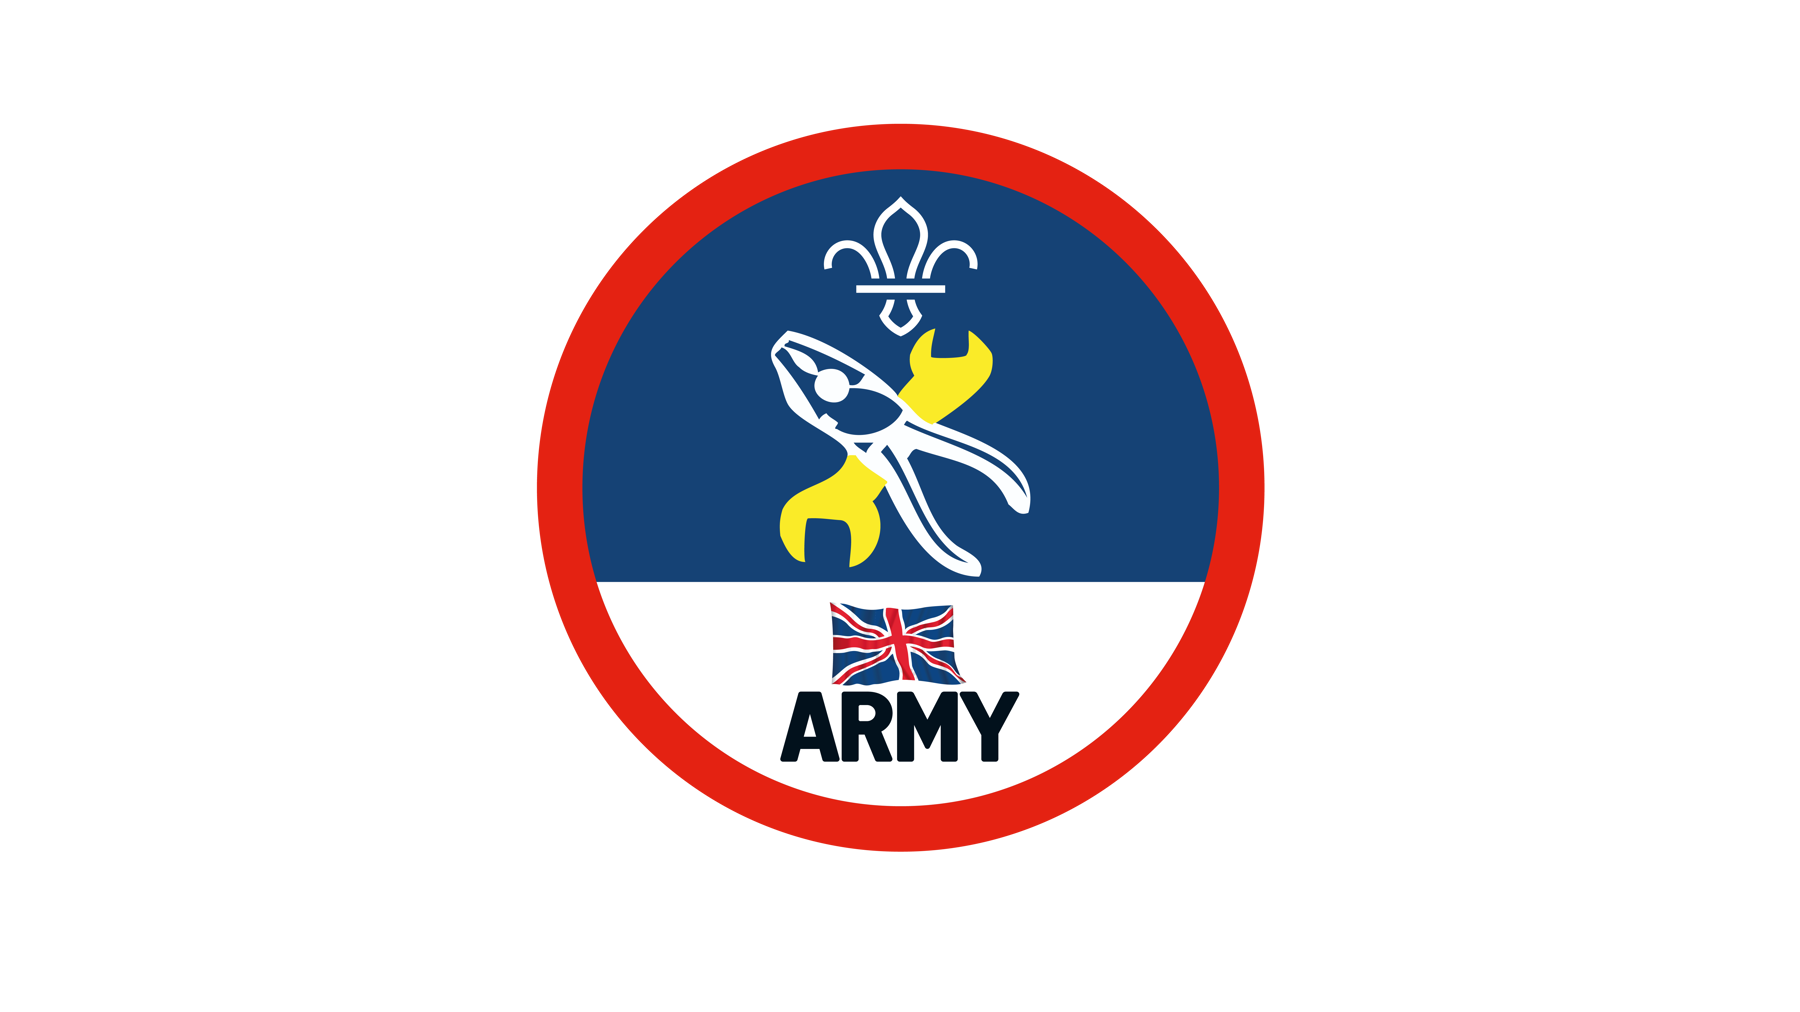 A blue badge with a wrench and the Army logo